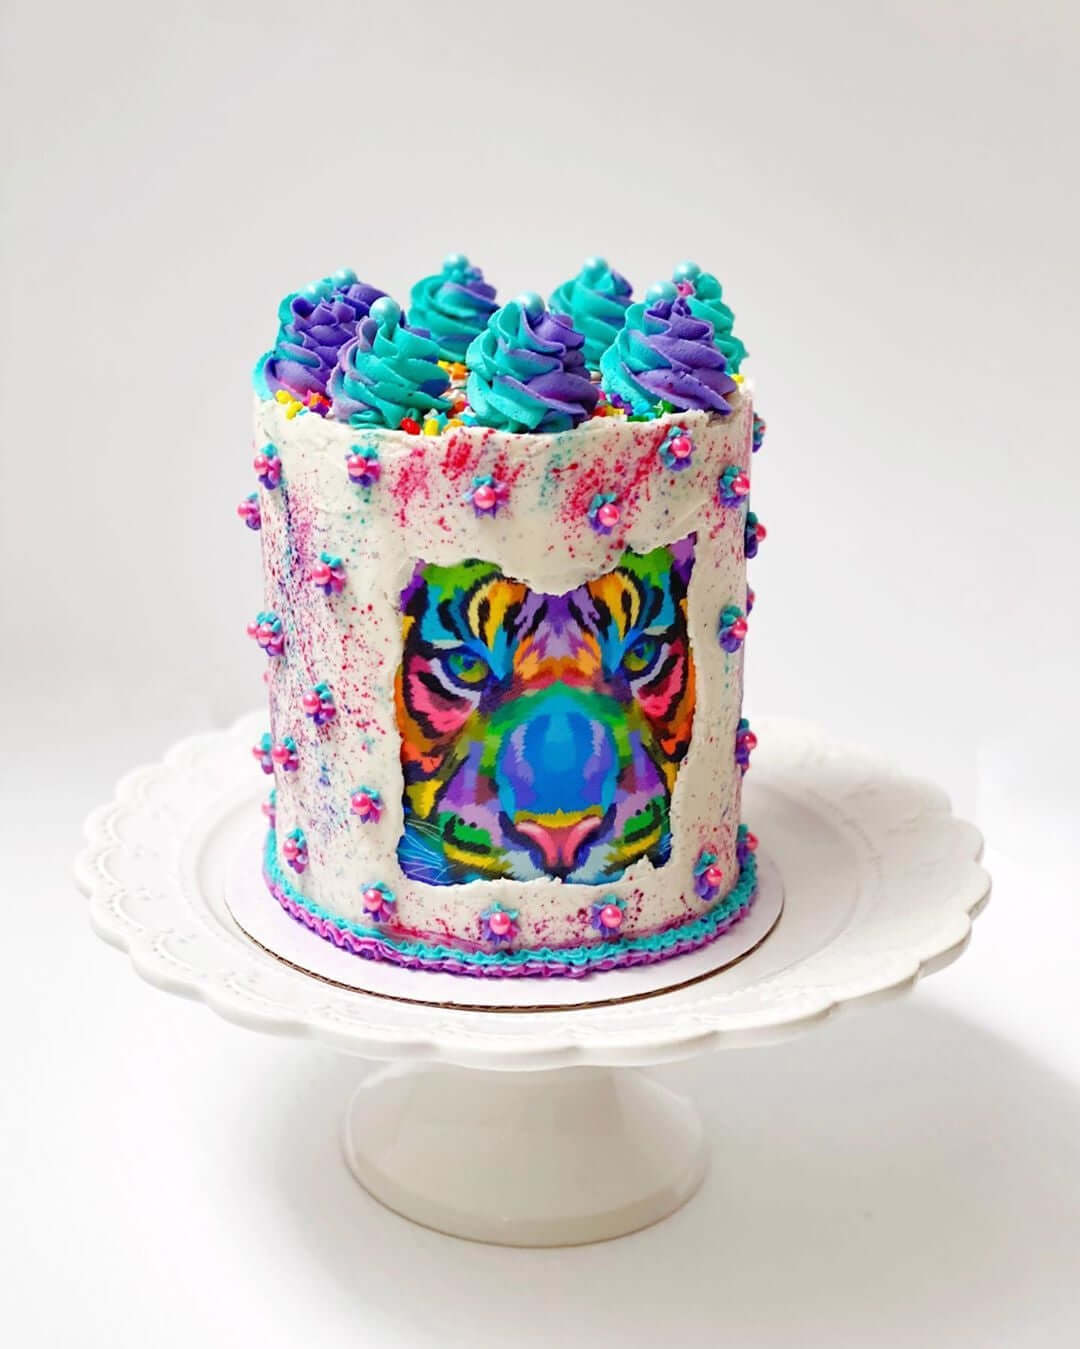 Colorful Tiger Face - Icing - ISA080.